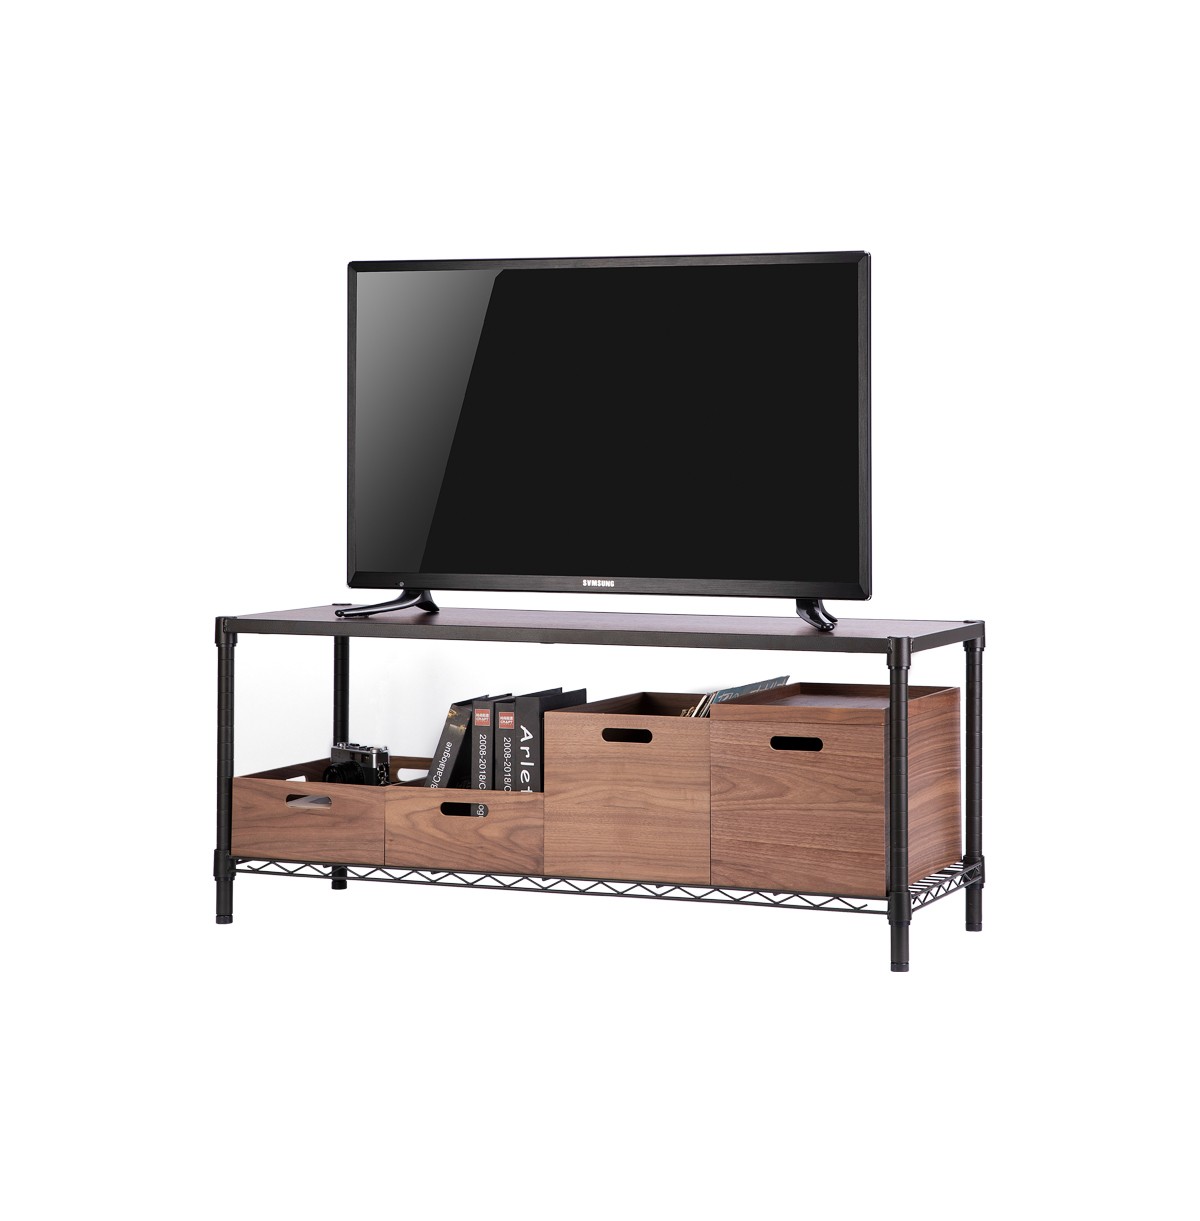 2-Tier Metal TV Stand / Entertainment Center / TV Console Table For Living Room / Bedroom